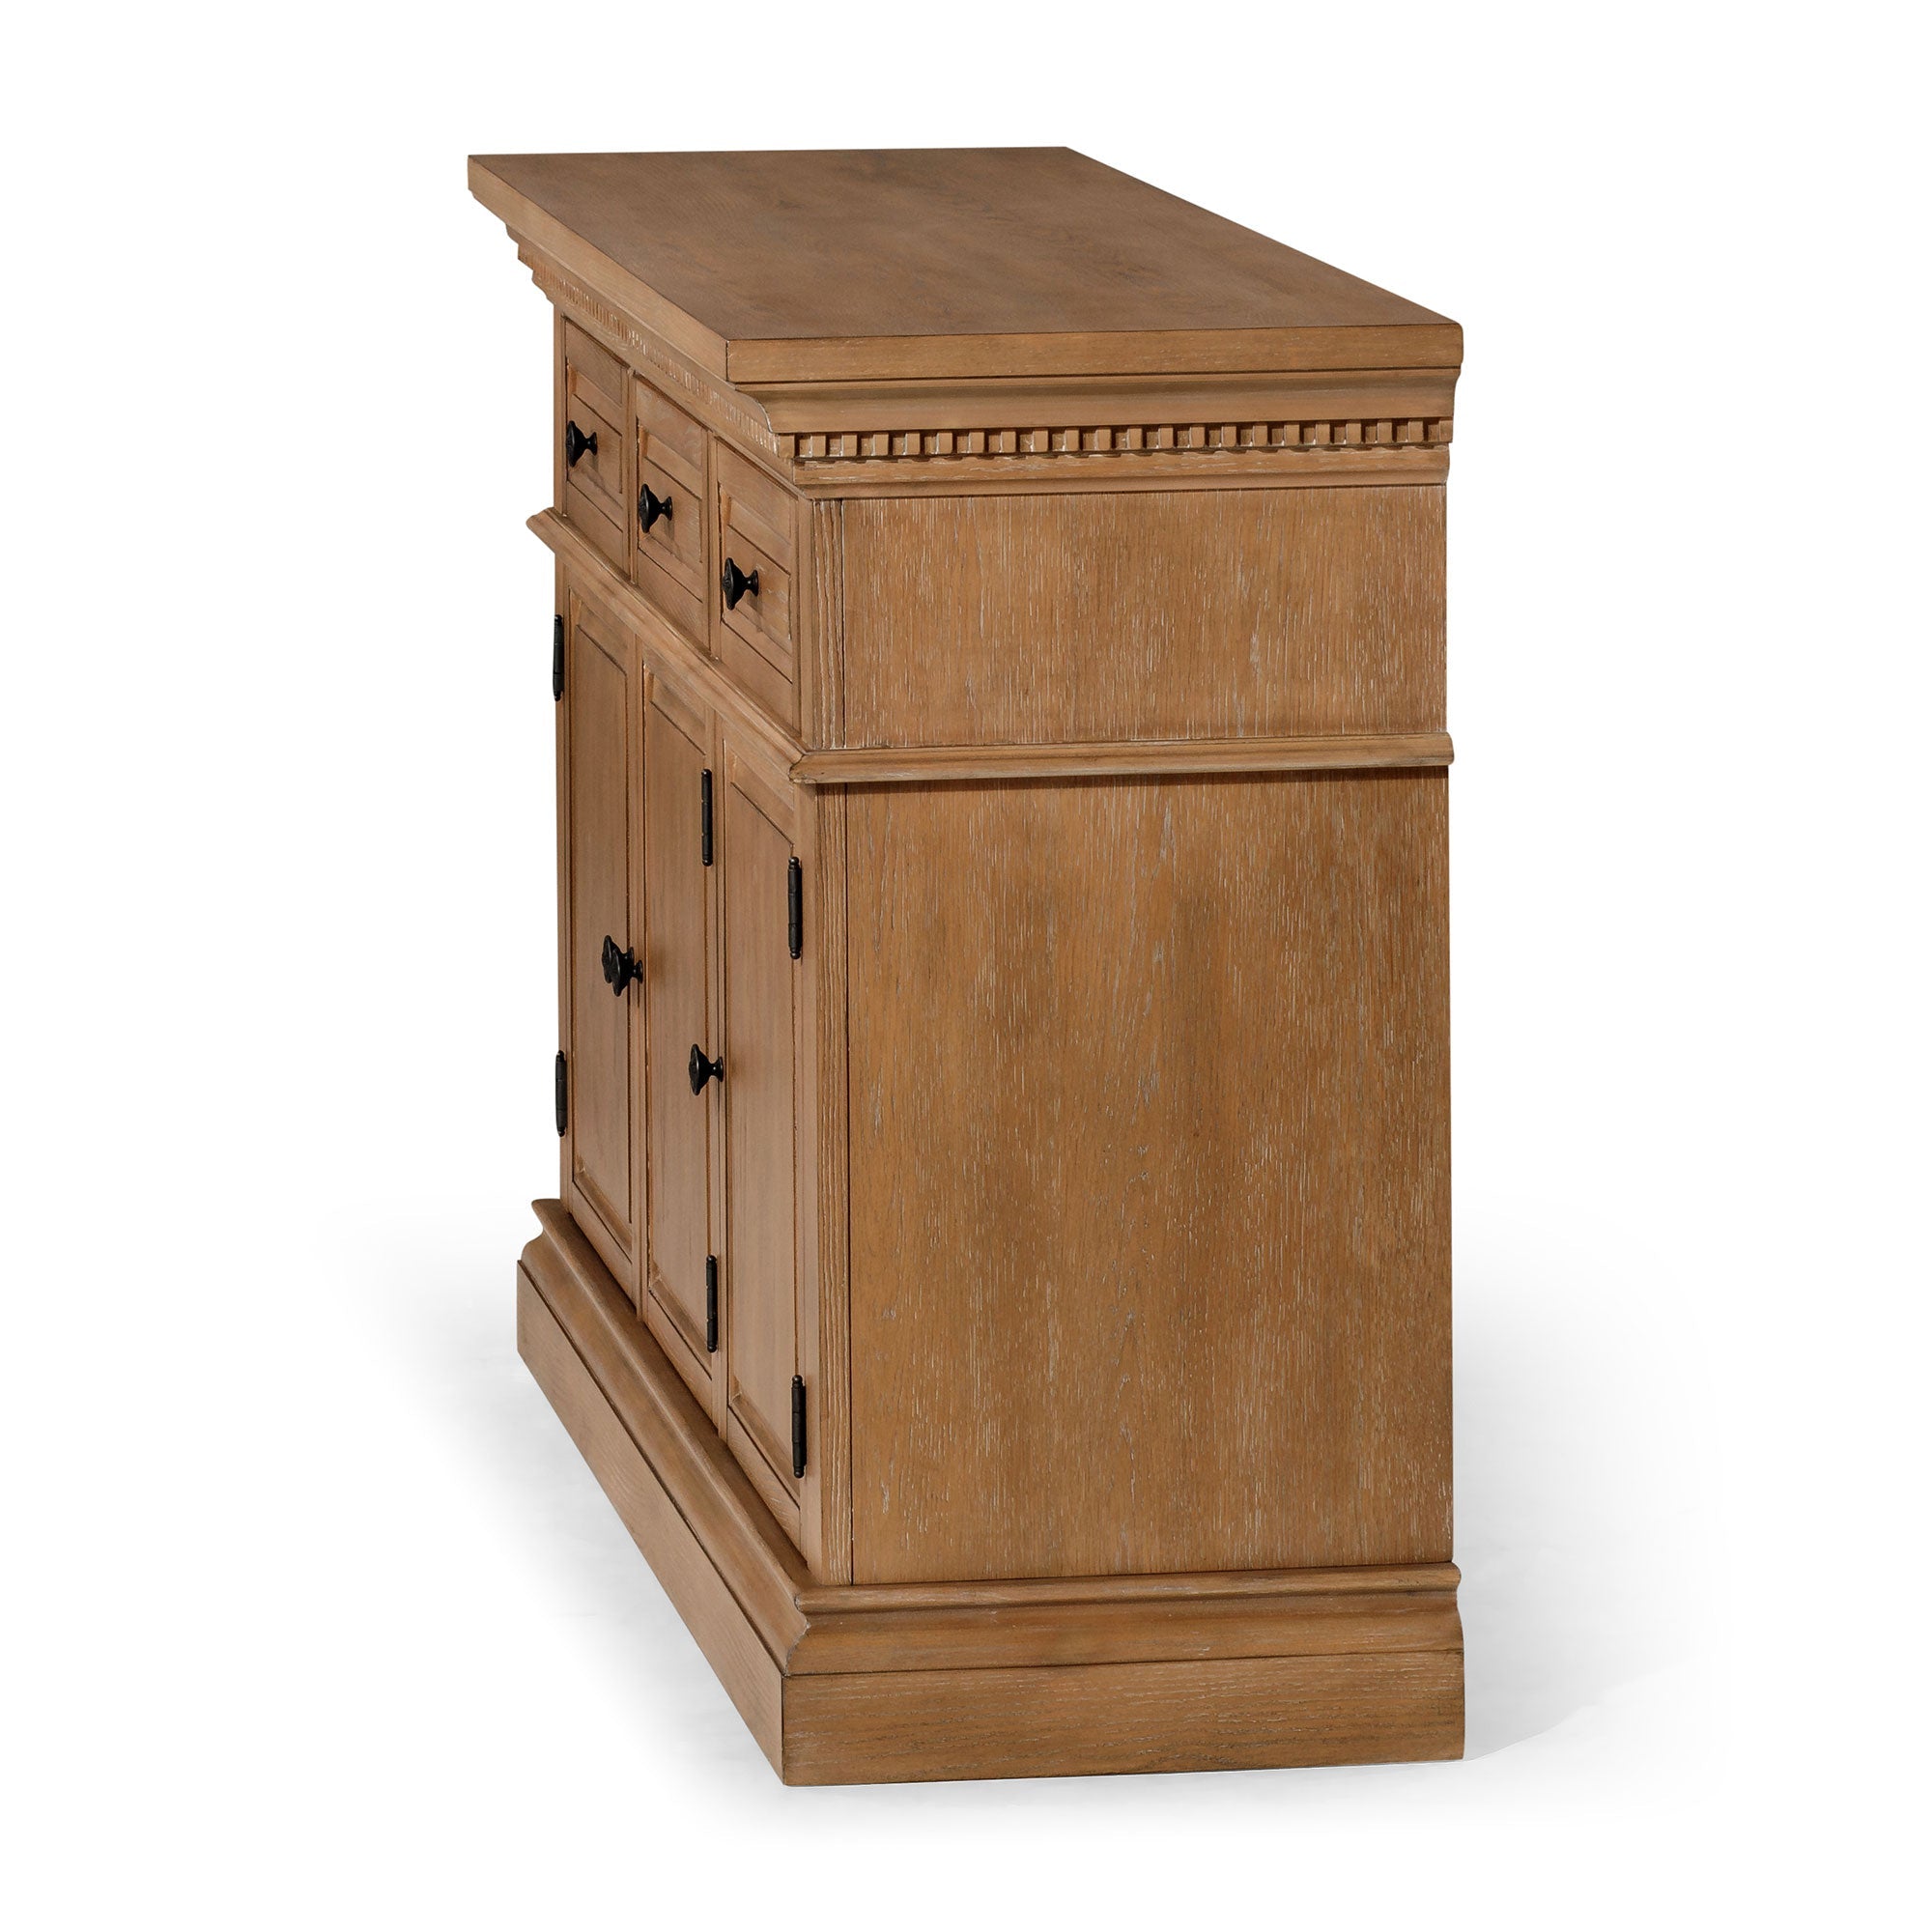 Theo Classical Wooden Sideboard in Antiqued Natural Finish in Cabinets by Maven Lane